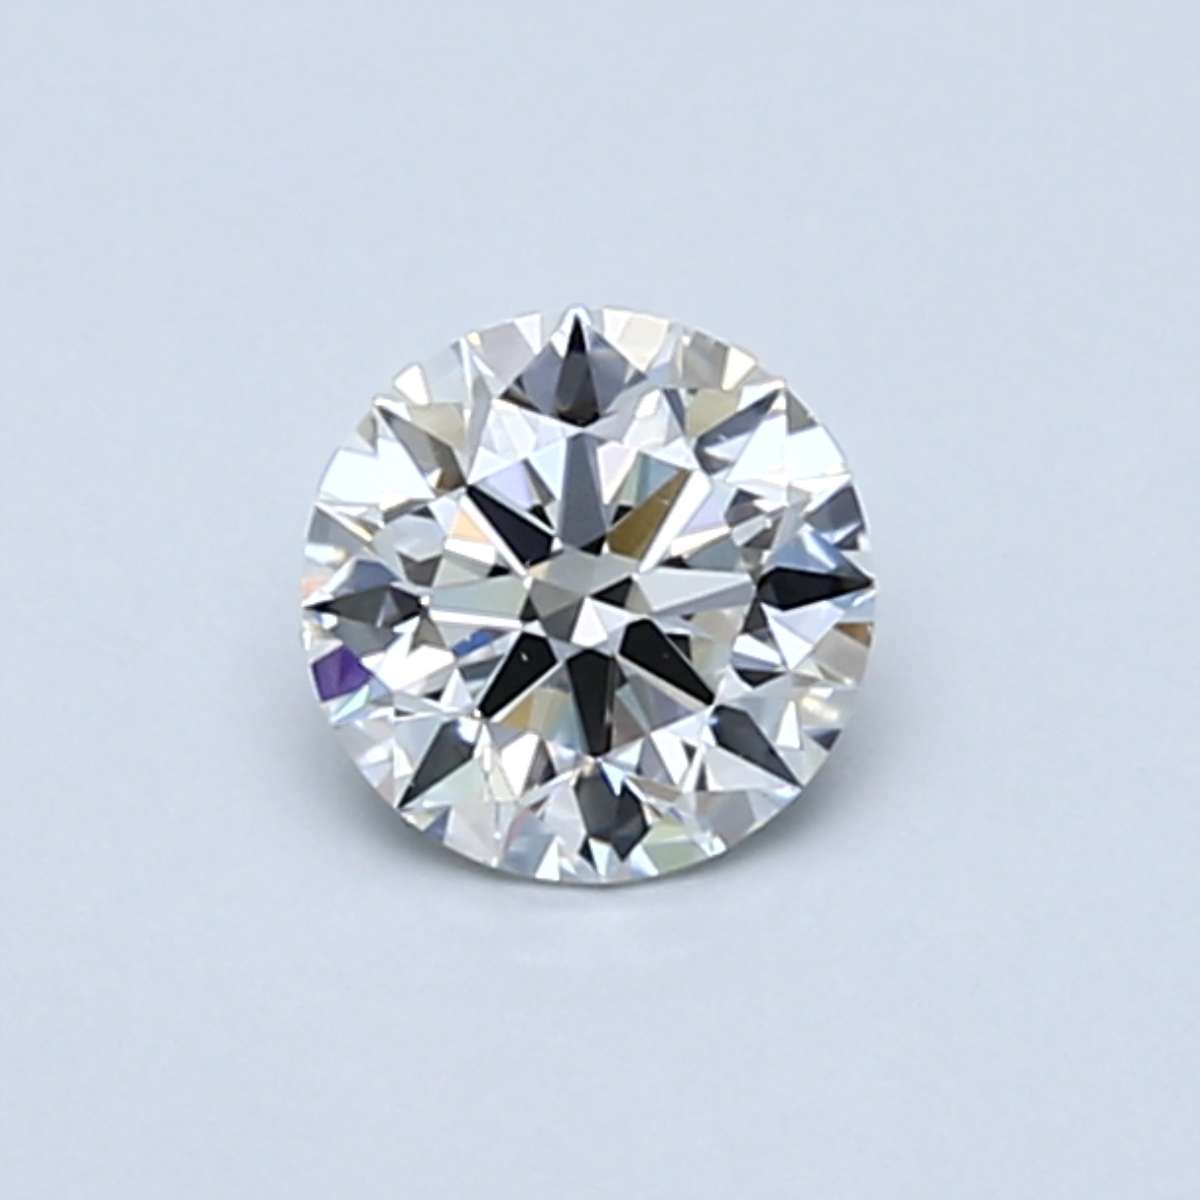 Round 0.5 Carat G Color VS2 Clarity For Sale